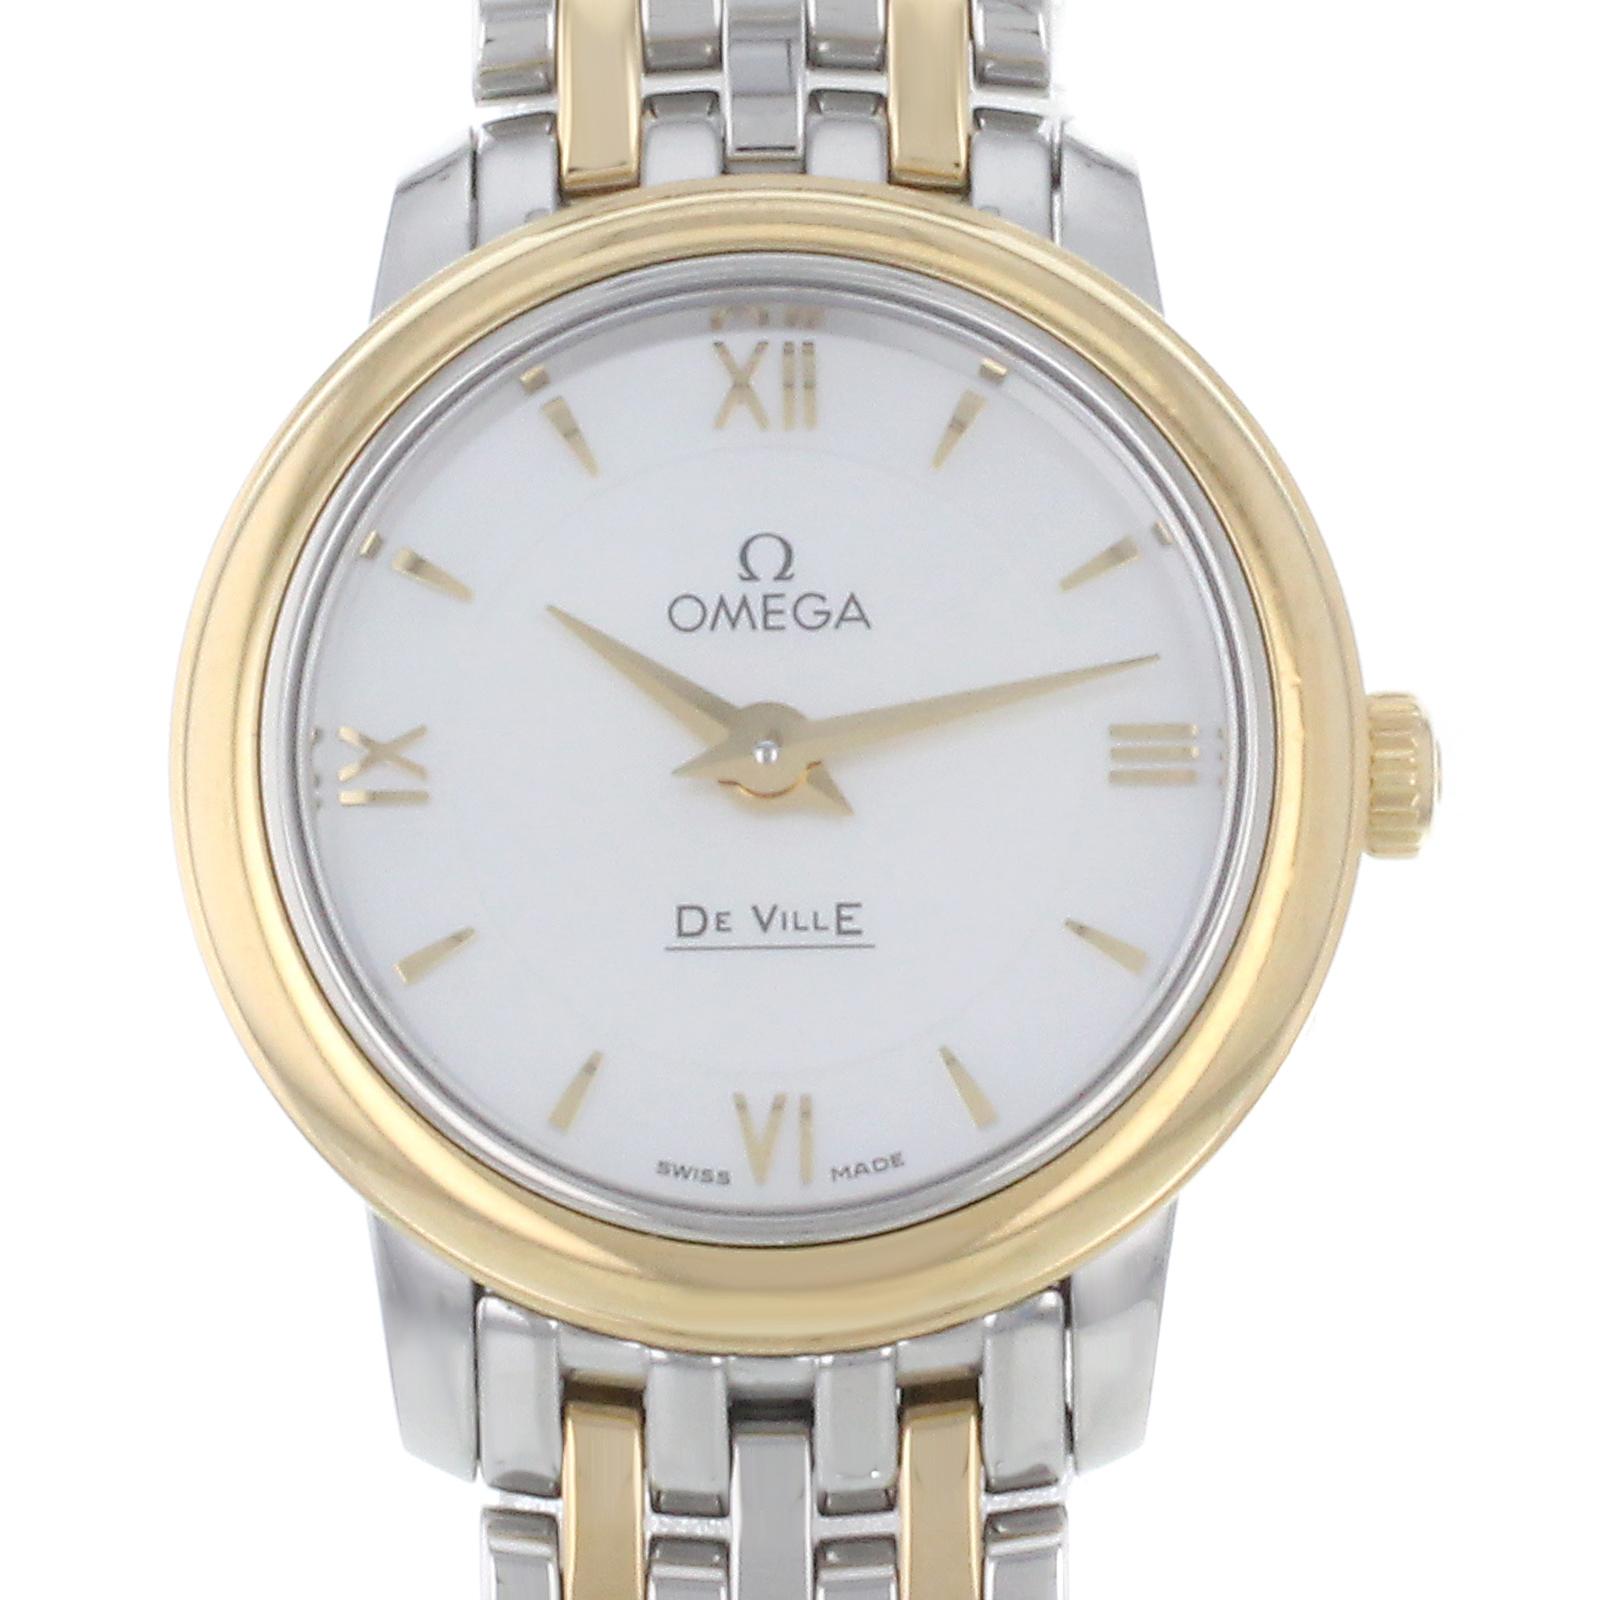 This display model Omega DeVille 424.20.24.60.05.001 is a beautiful Ladies timepiece that is powered by a quartz movement which is cased in a stainless steel case. It has a round shape face, no features dial and has hand roman numerals, sticks style